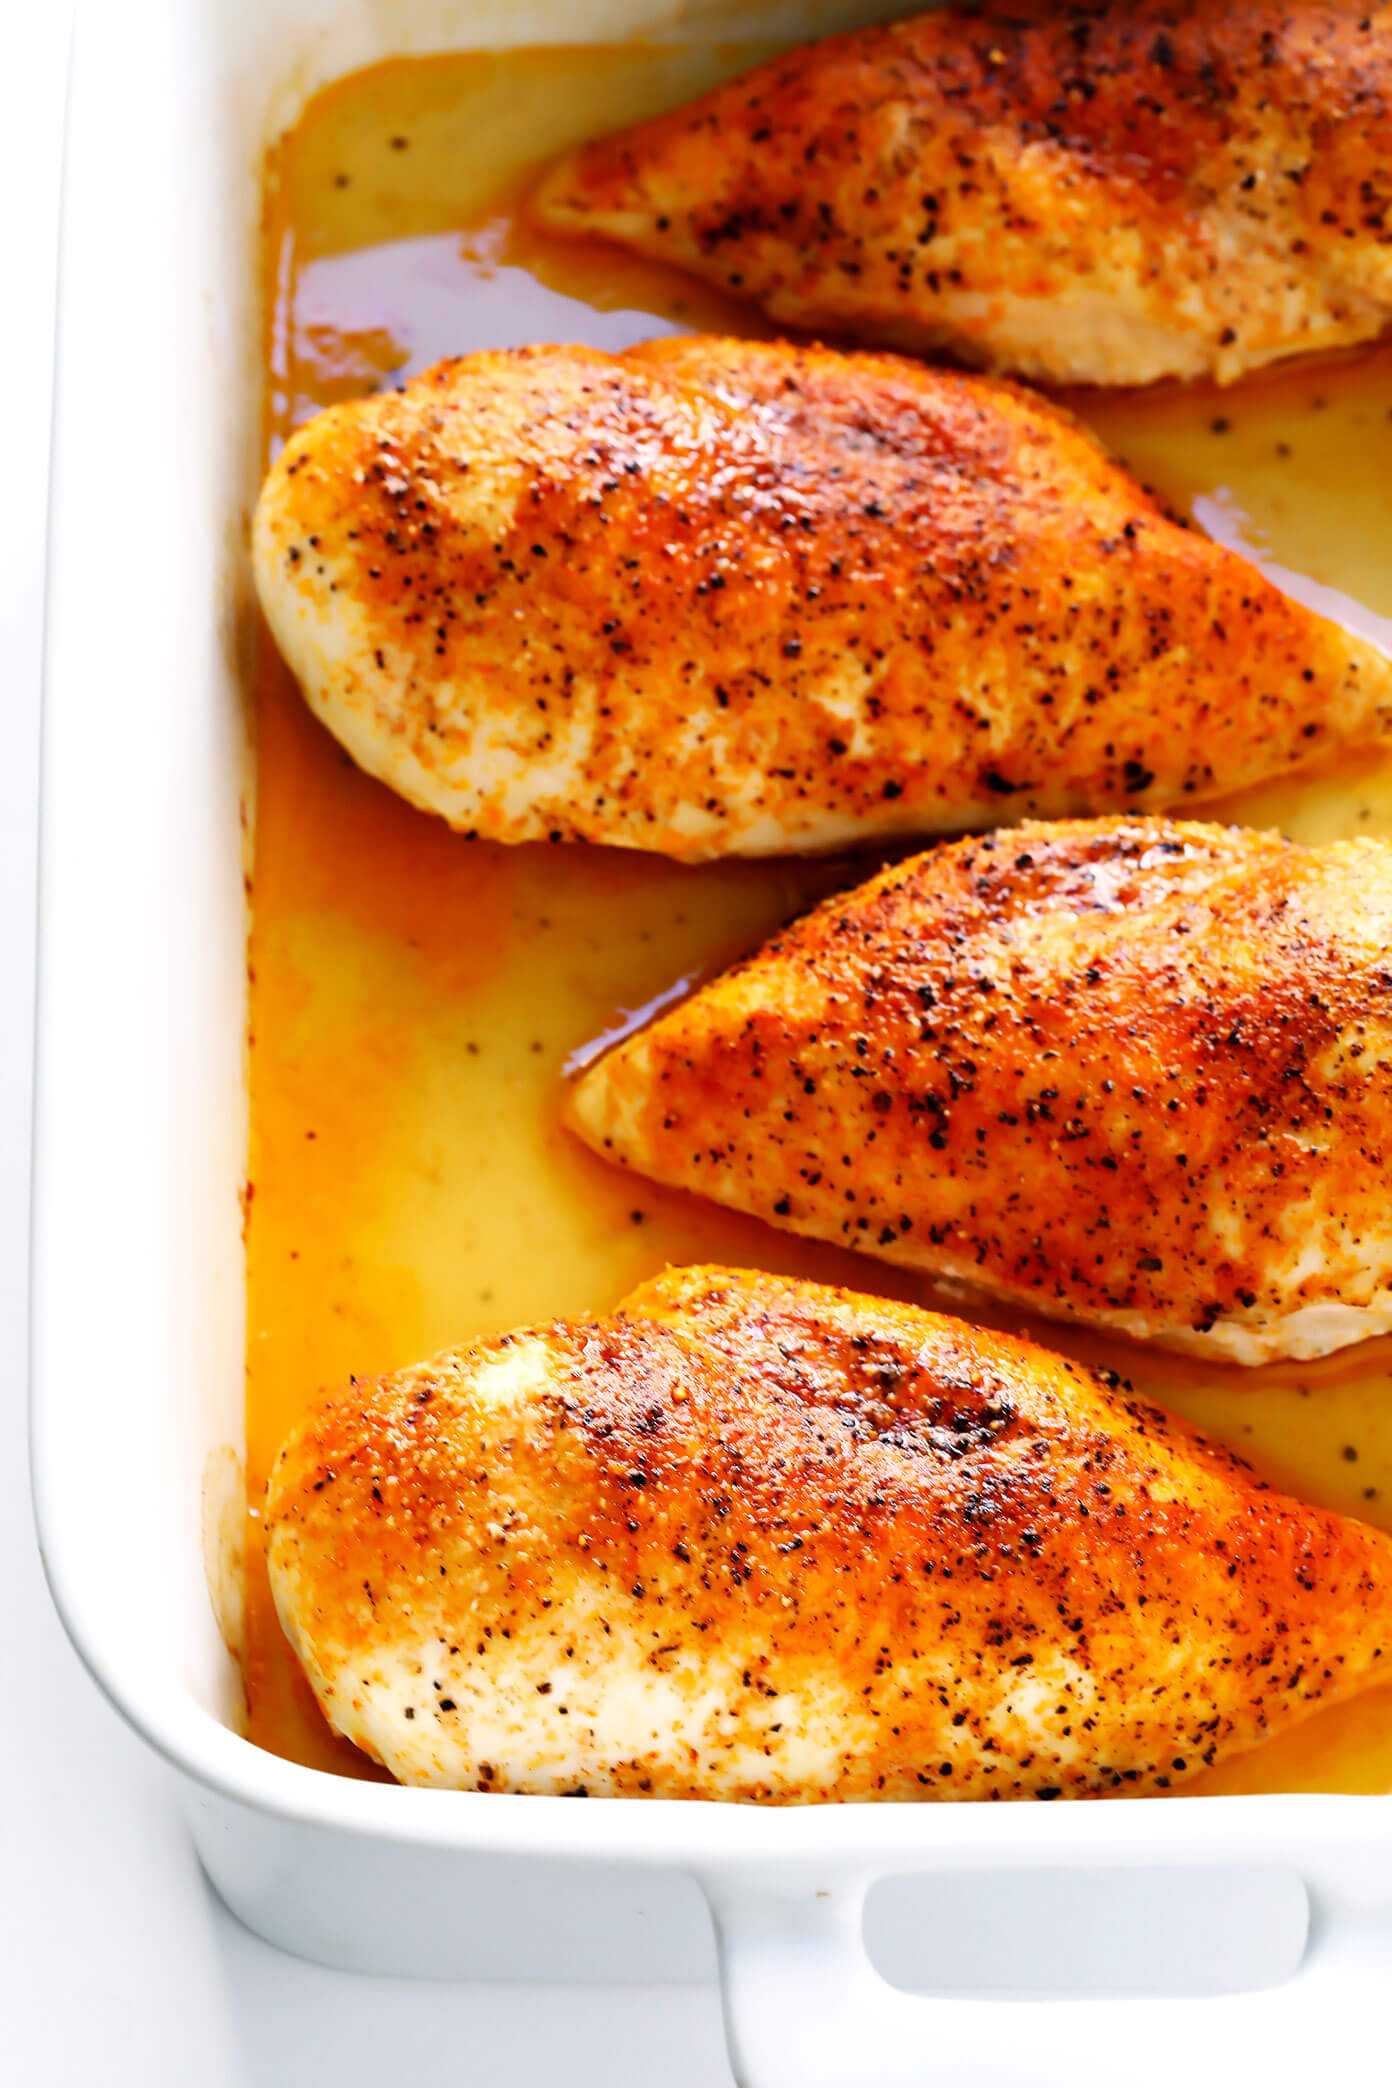 Recipes For Baked Chicken
 Baked Chicken Breast